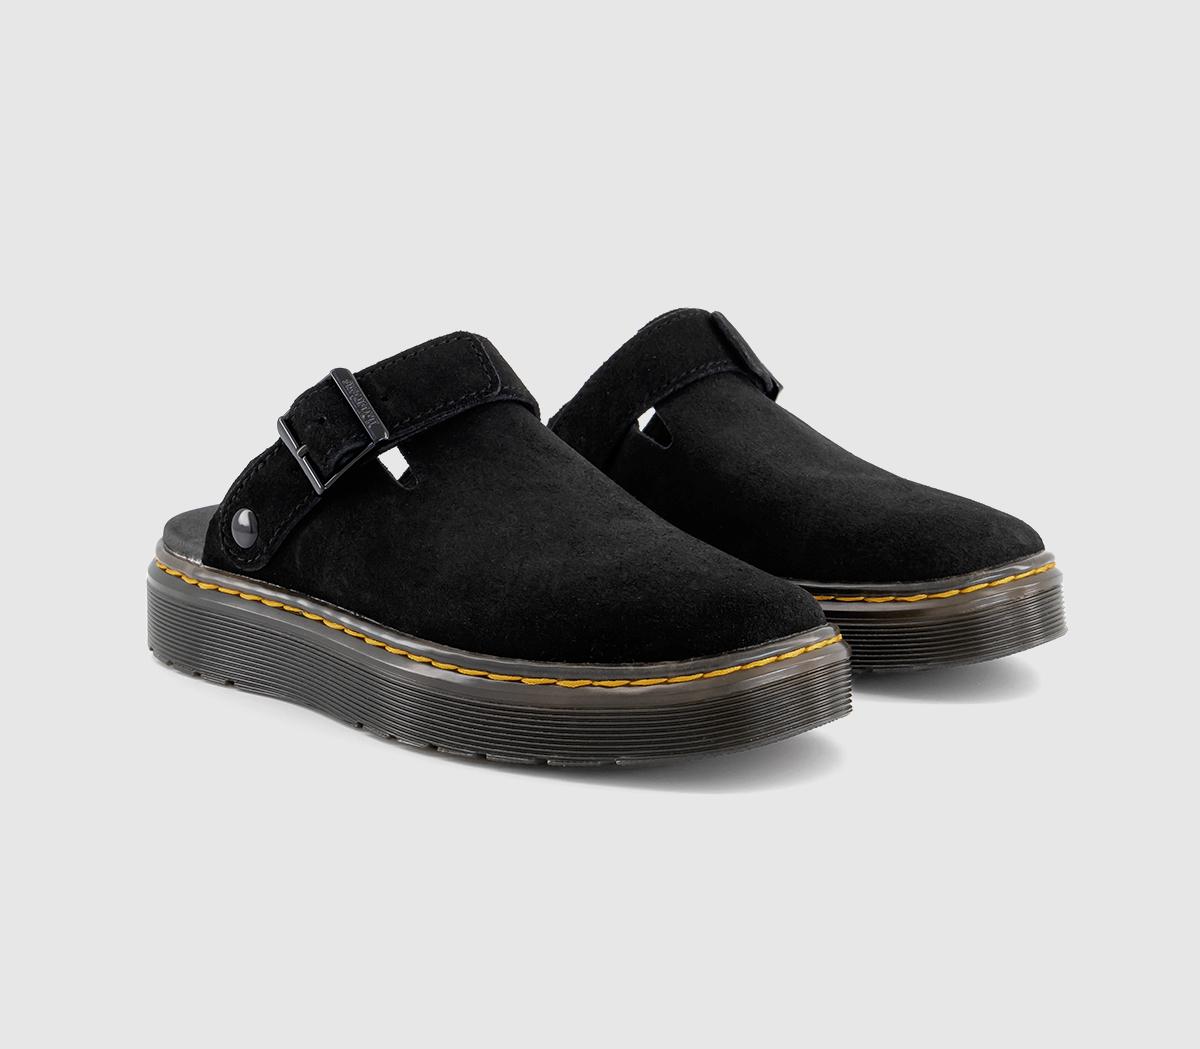 Dr. Martens Womens Carlson Mules Black Suede, 4